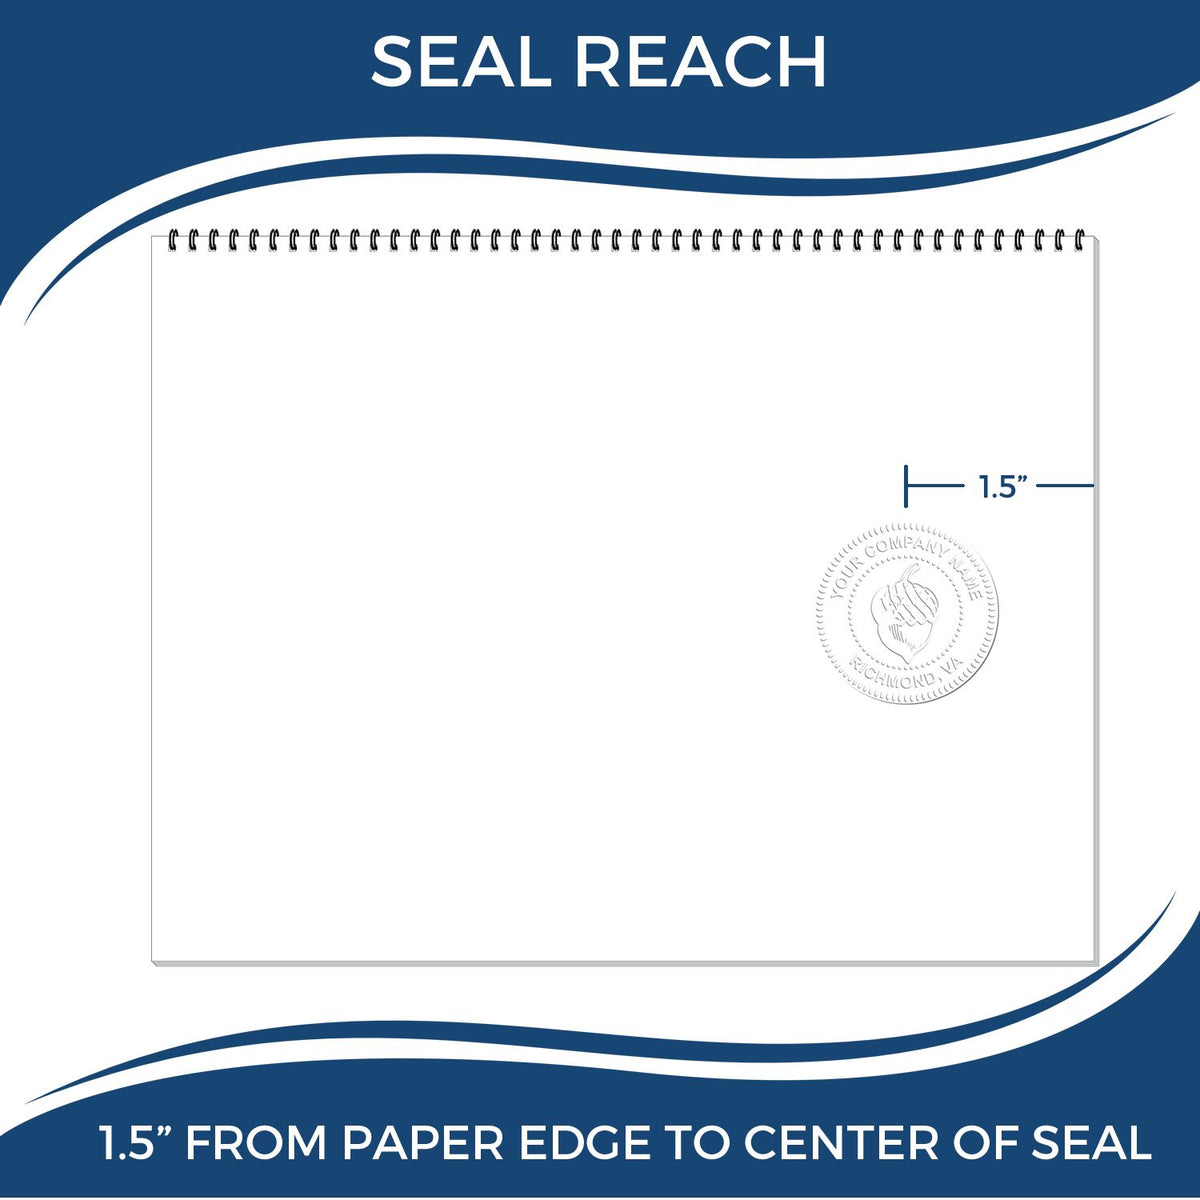 An infographic showing the seal reach which is represented by a ruler and a miniature seal image of the Gift Guam Land Surveyor Seal